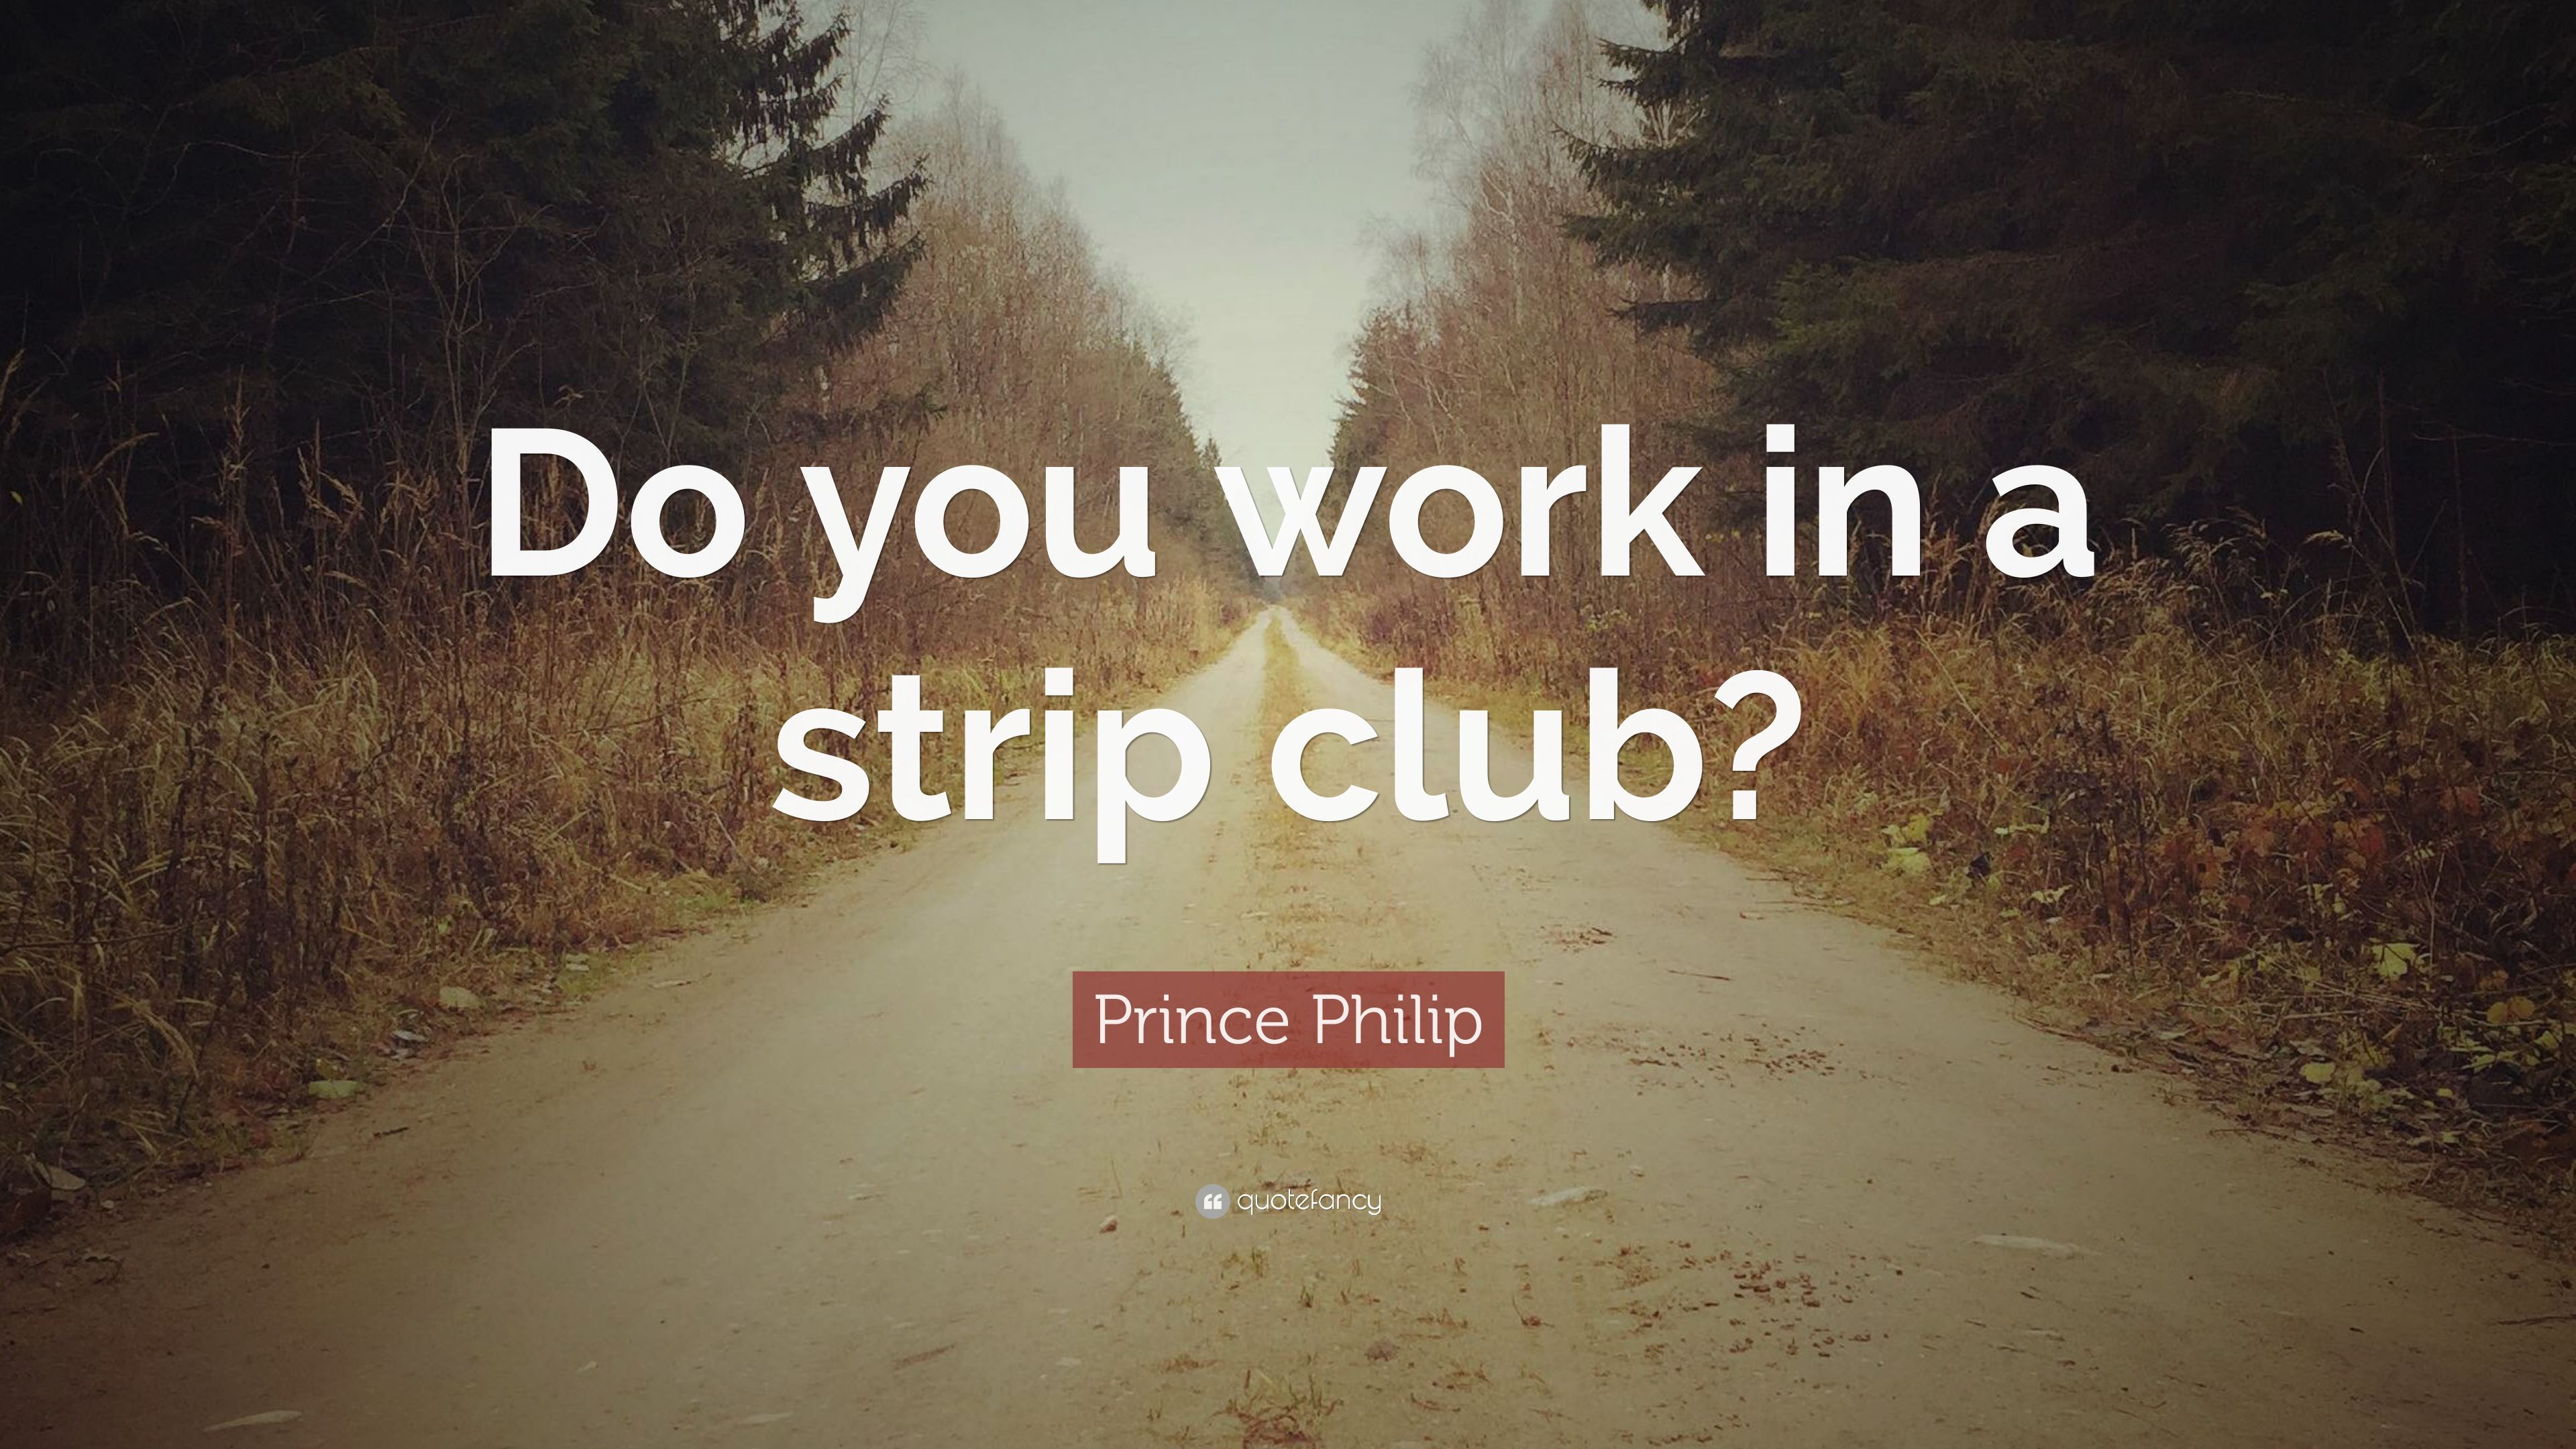 Prince Philip Quote: “Do you work in a strip club?” 7 wallpaper